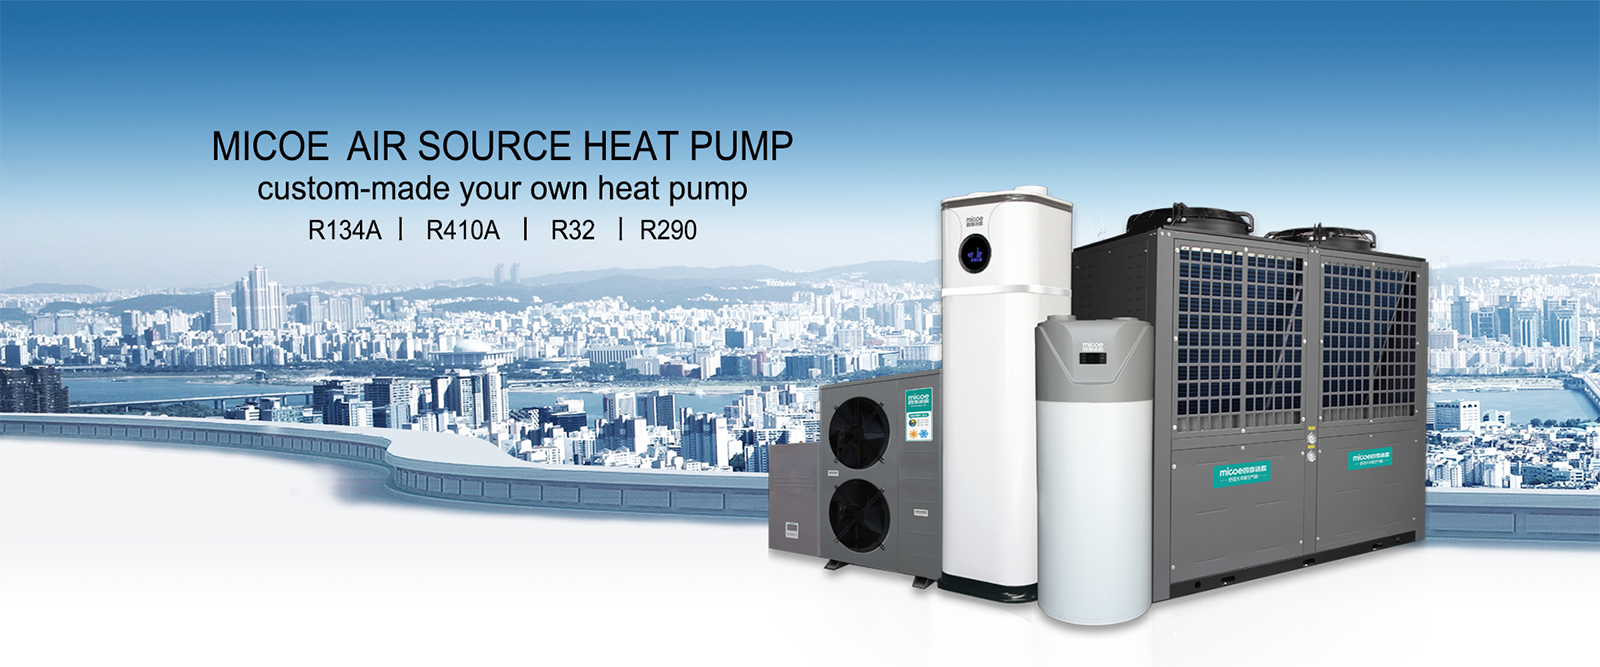 OEM hot water heat pump for residential projects